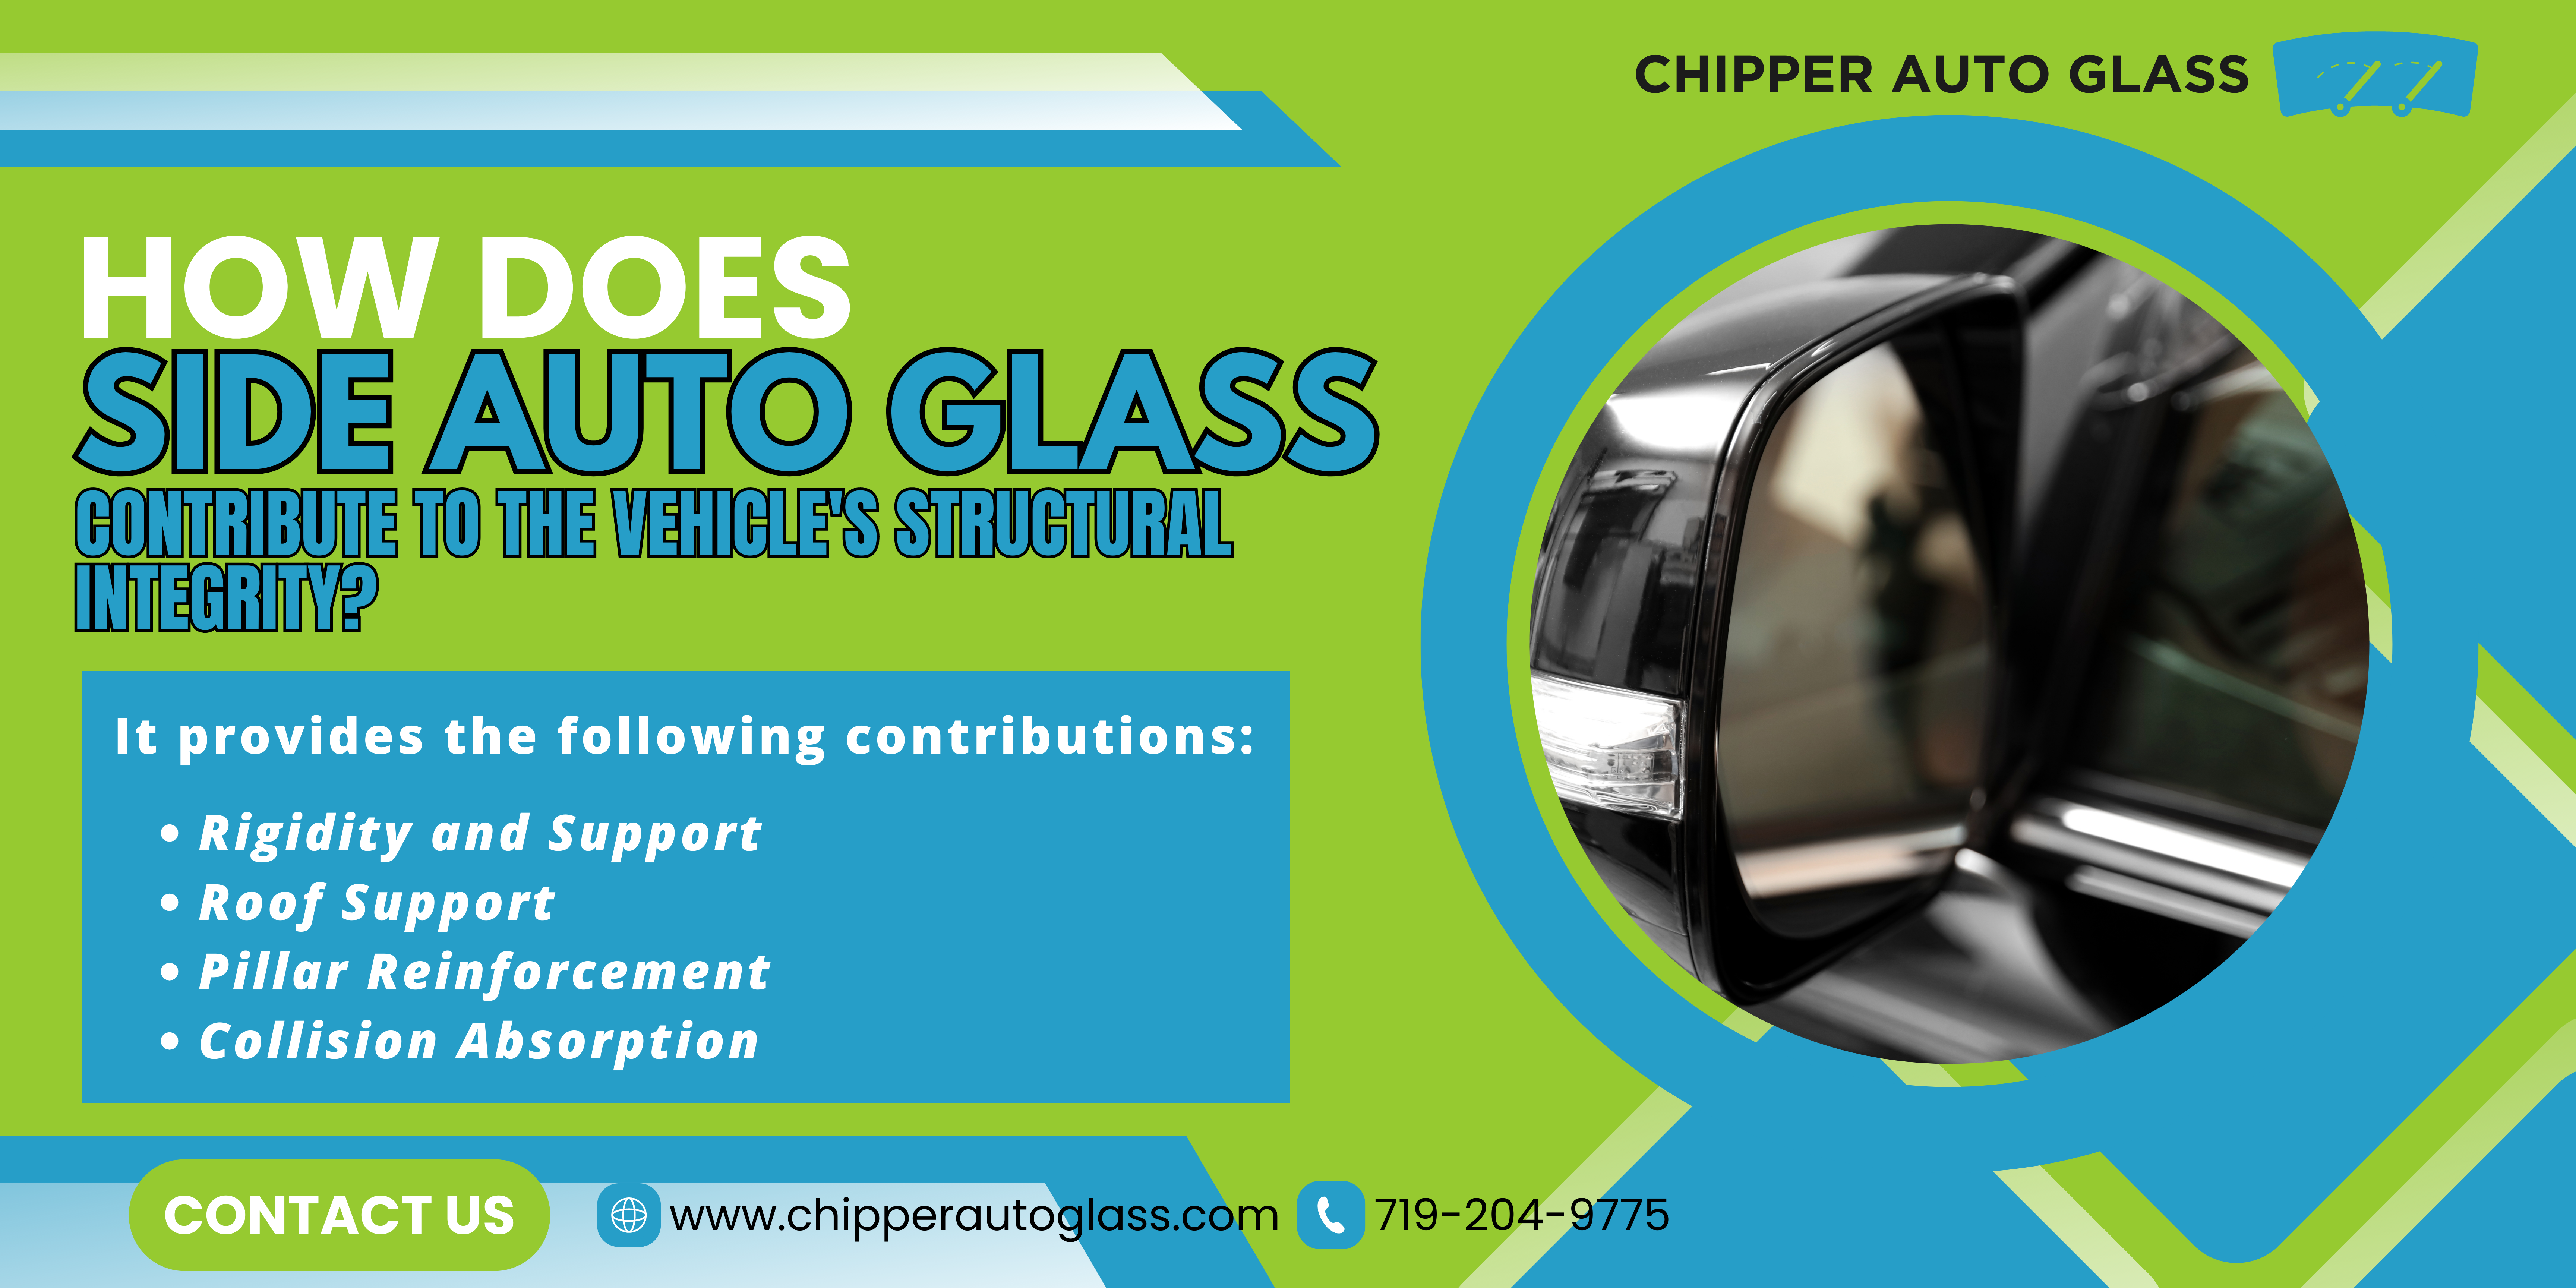 Importance of Timely Side Auto Glass Repair or Replacement for Vehicle Safety